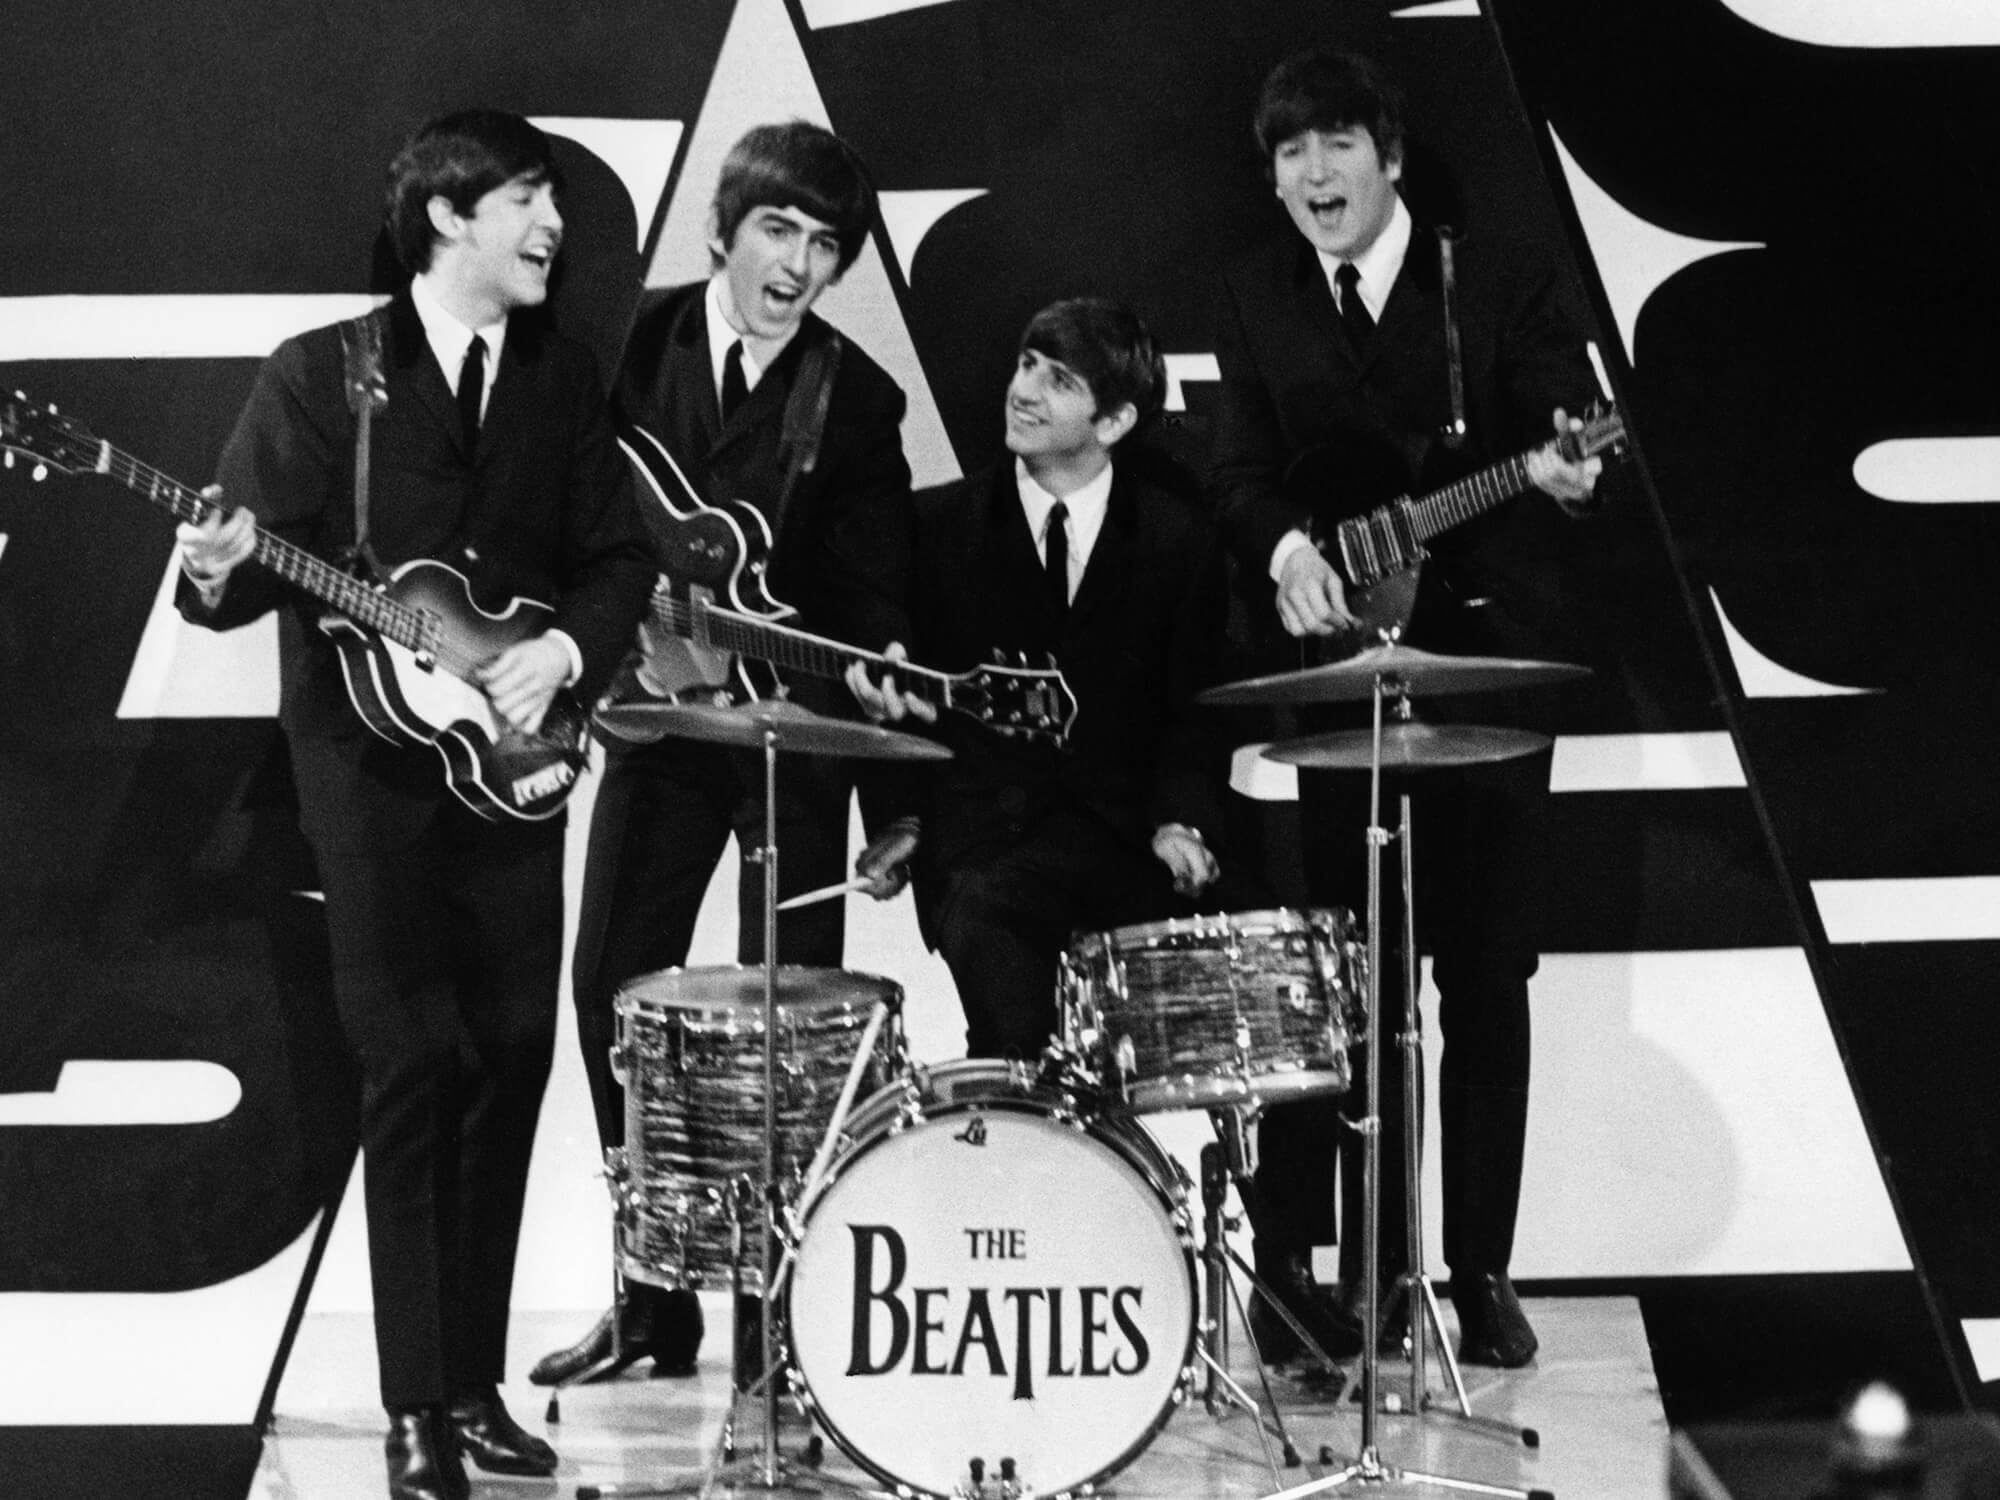 The Beatles clustered together in front of a black and white background. Paul, George and John hold their guitars and Ringo sits at his drum kit.